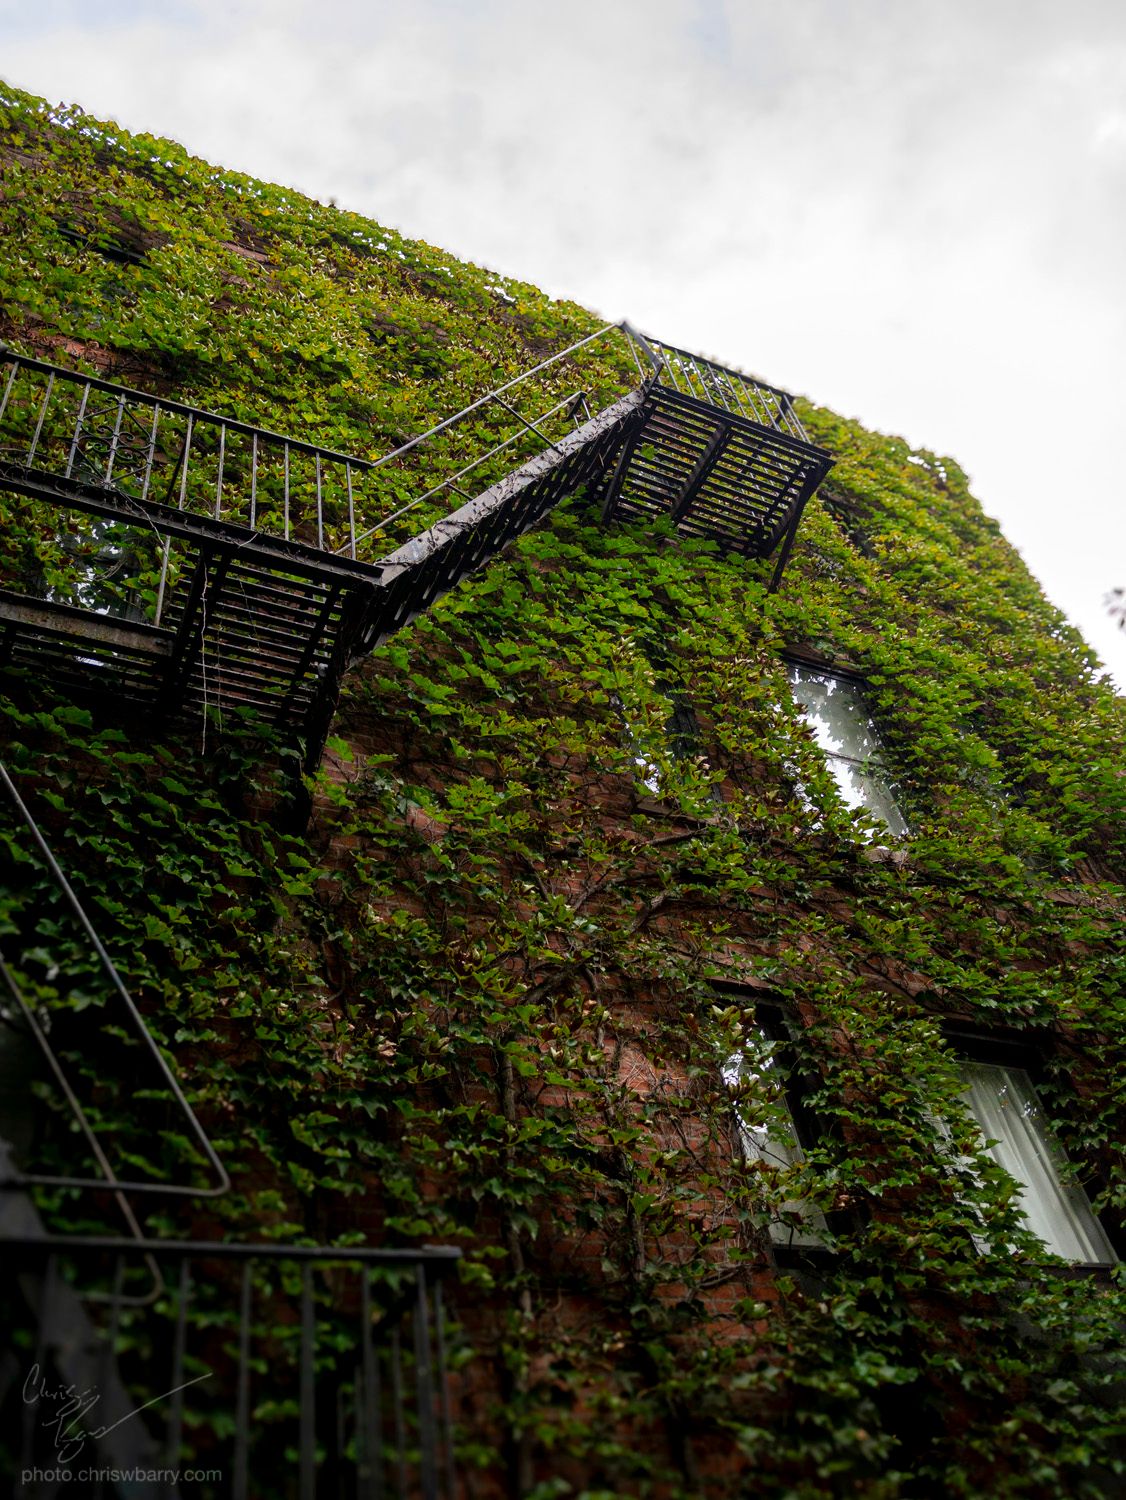 Low angle photo of a brick apartment building, covered in green vines. A fire black escape juts out of the center